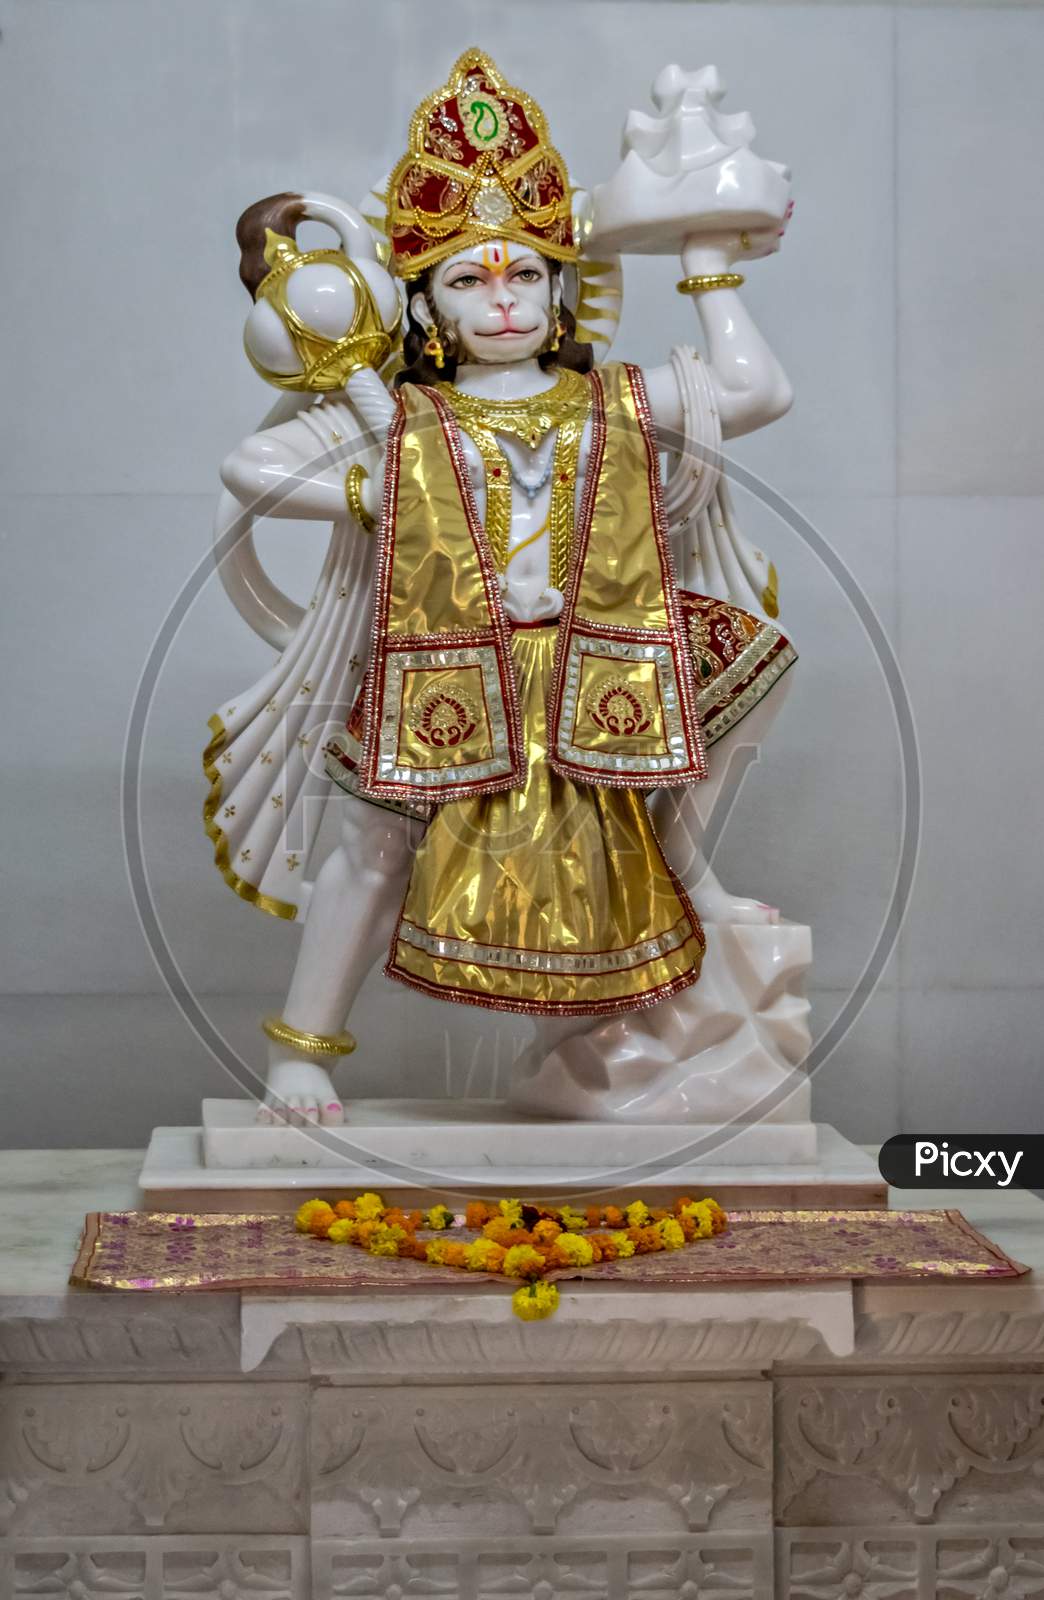 Nicely Carved And Decorated Idol Of Hindu God Hanuman In A Temple At Somnath.